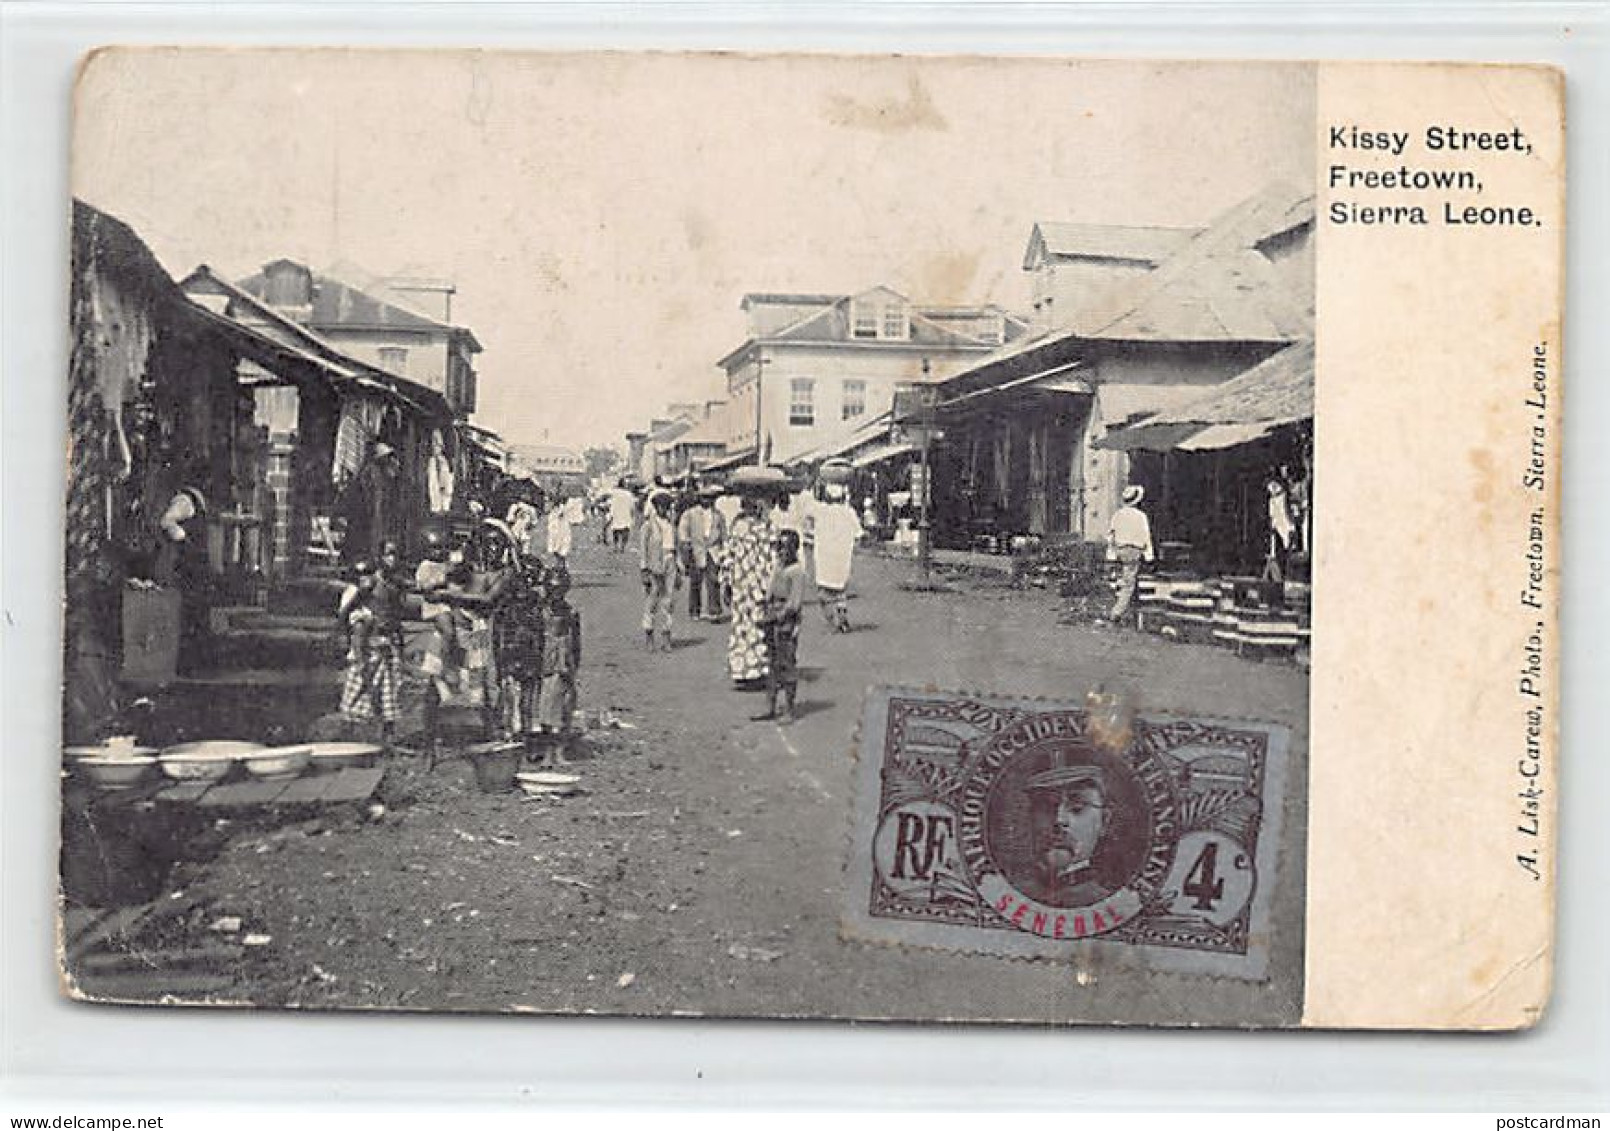 Sierra Leone - FREETOWN - Kissy Street - SEE SCANS FOR CONDITION - Publ. A. Lisk-Carew - Sierra Leone